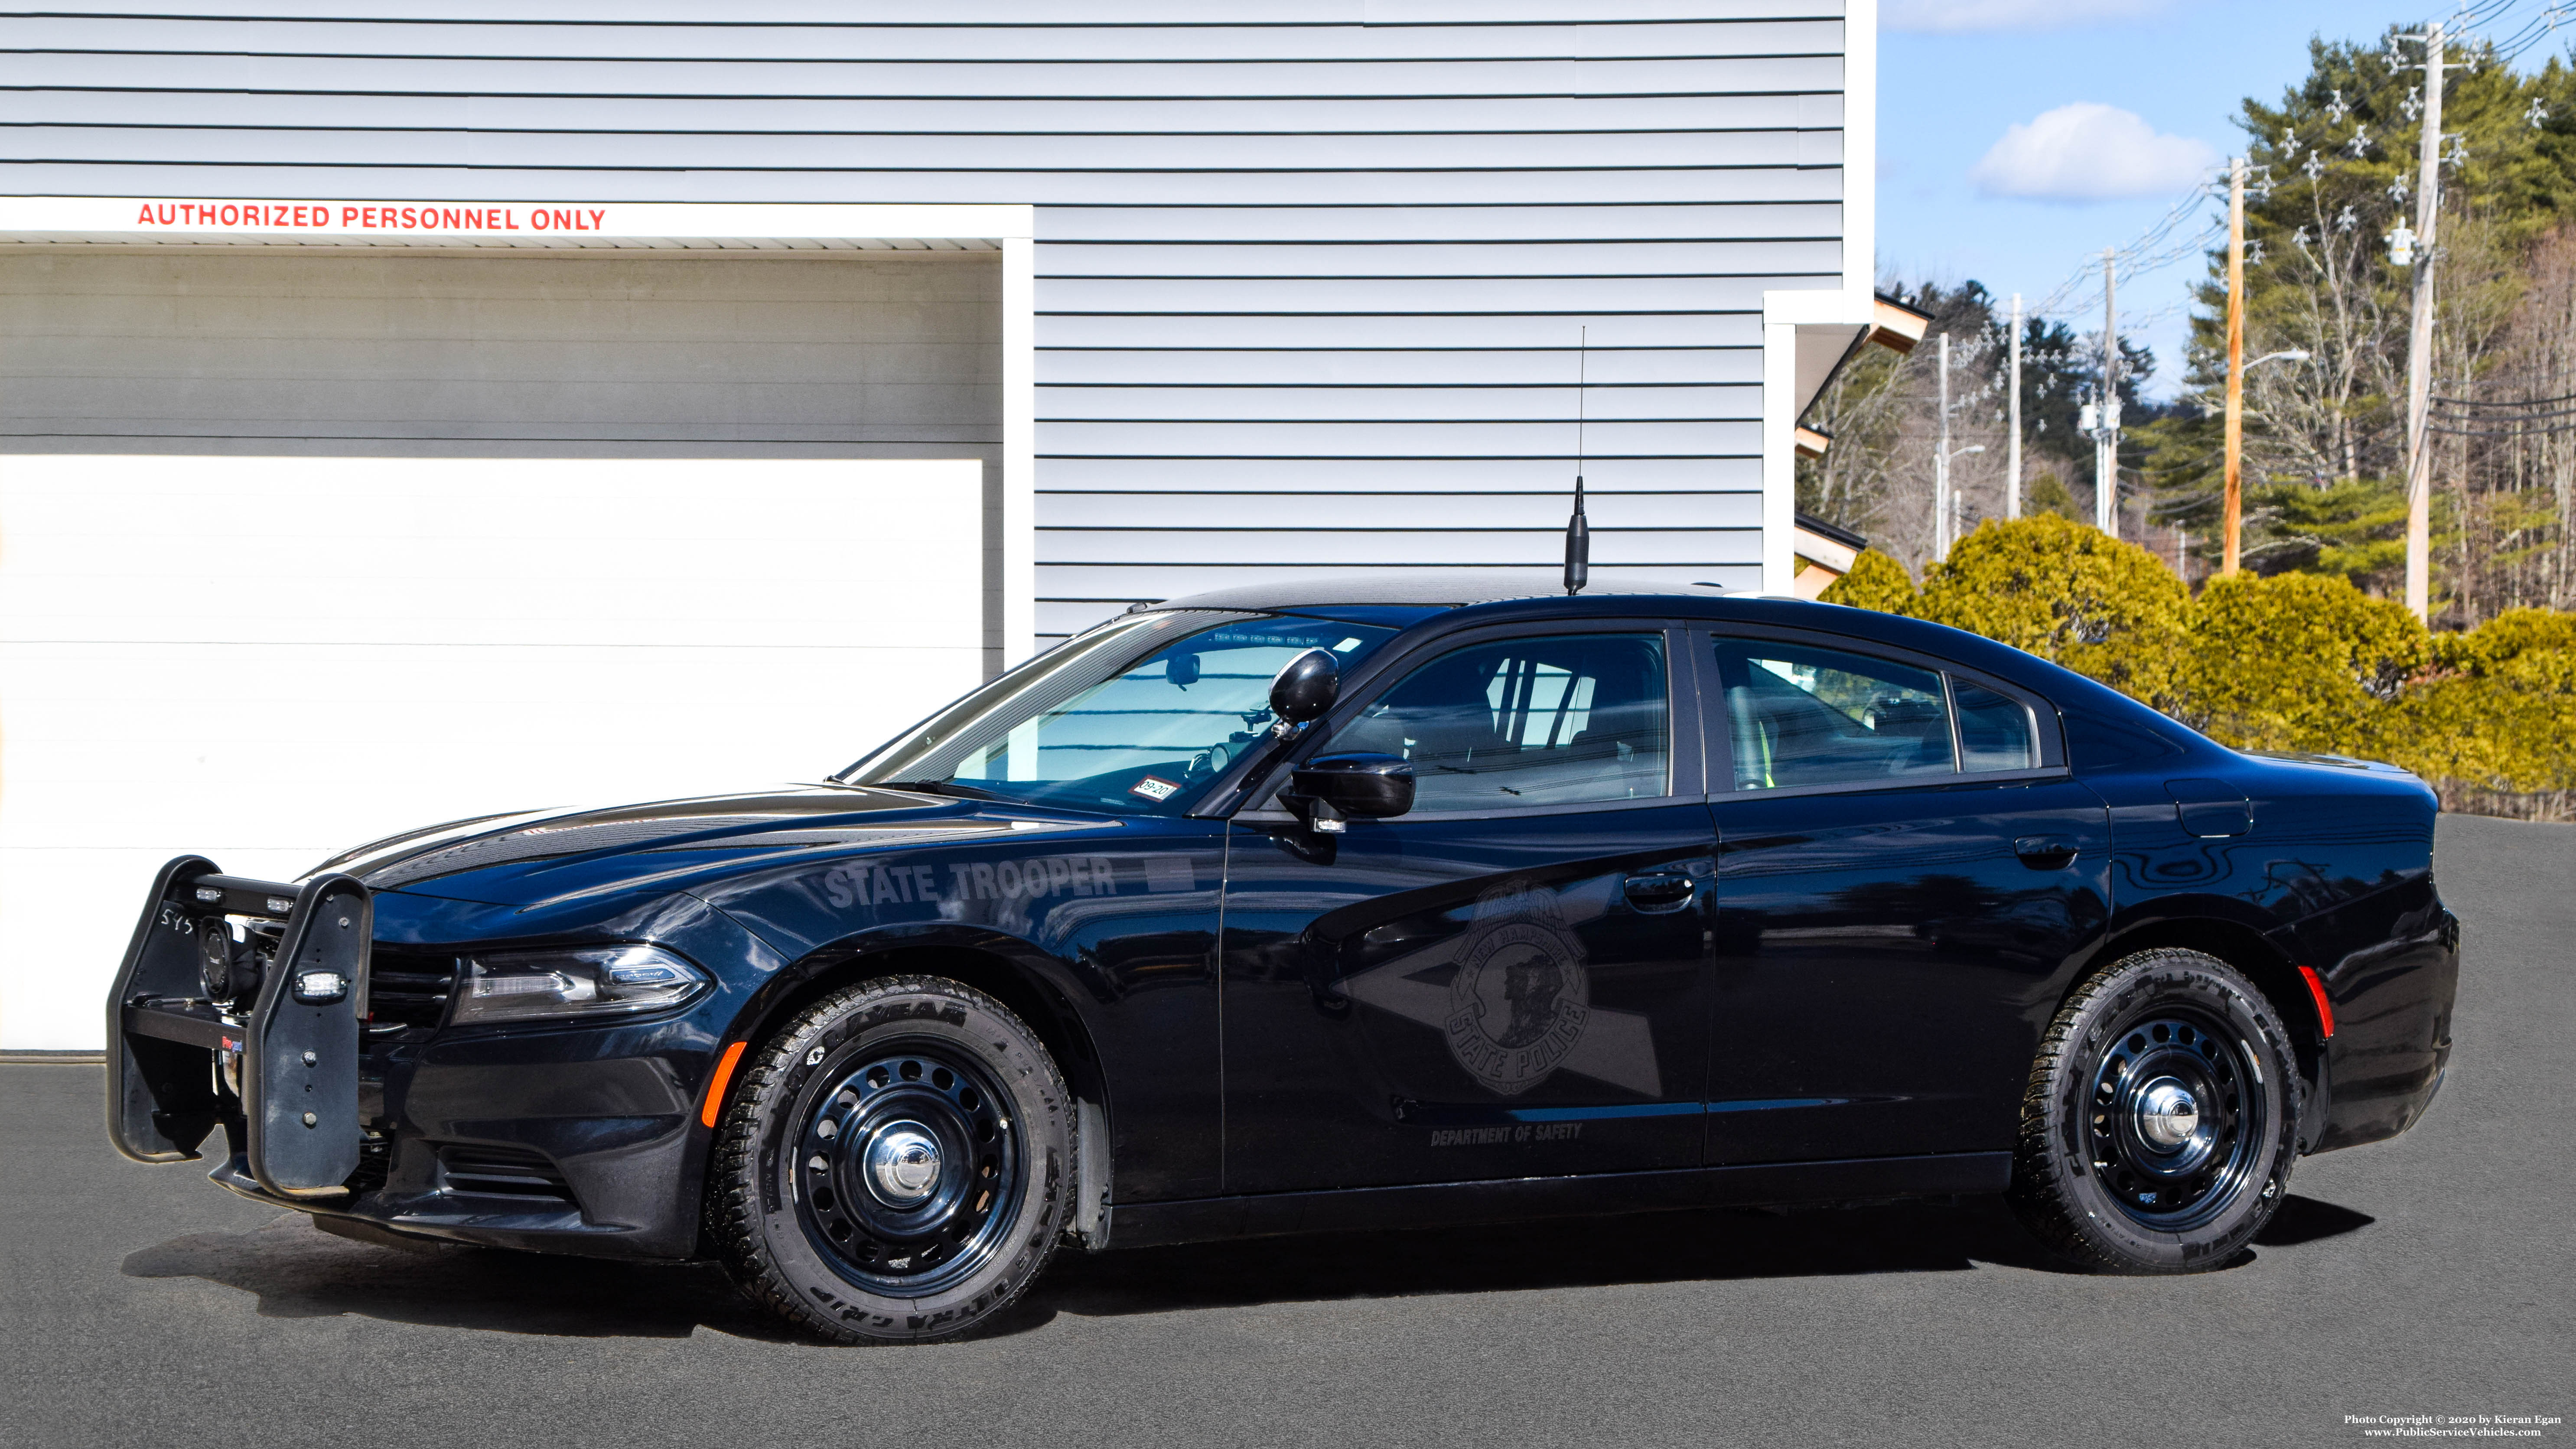 A photo  of New Hampshire State Police
            Cruiser 613, a 2019 Dodge Charger             taken by Kieran Egan